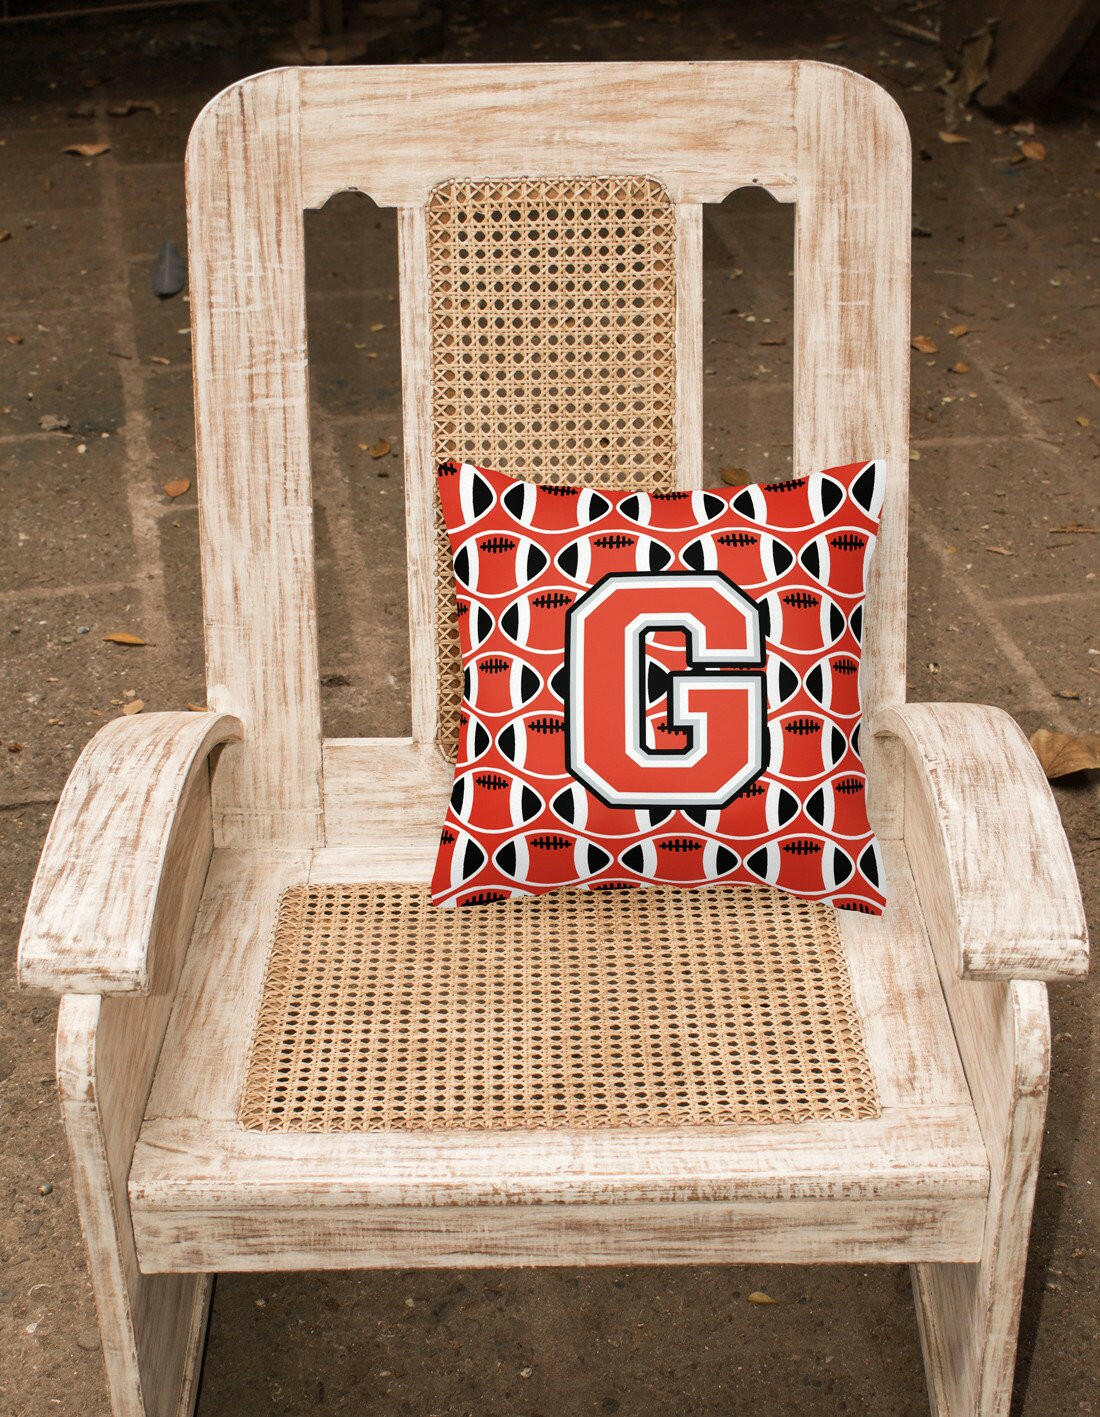 Letter G Football Scarlet and Grey Fabric Decorative Pillow CJ1067-GPW1414 by Caroline's Treasures